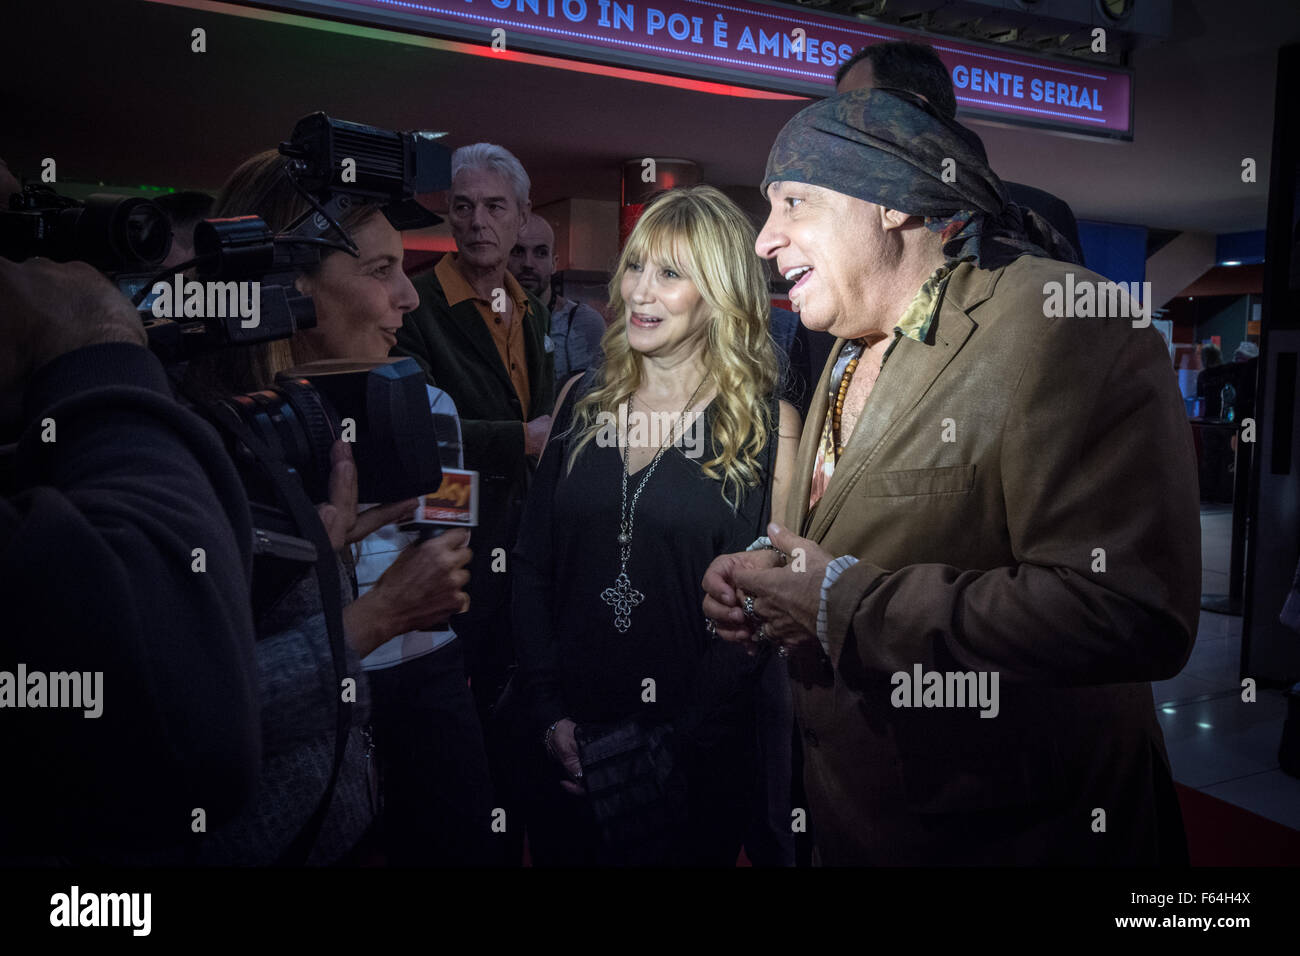 Rome, Italy. 11th Nov, 2015. American musician Steven Van Zandt and his wife Maureen Santoro attend a photocall at Cinema Adriano in Rome during the Roma Fiction Fest 2015. © Andrea Ronchini/Pacific Press/Alamy Live News Stock Photo